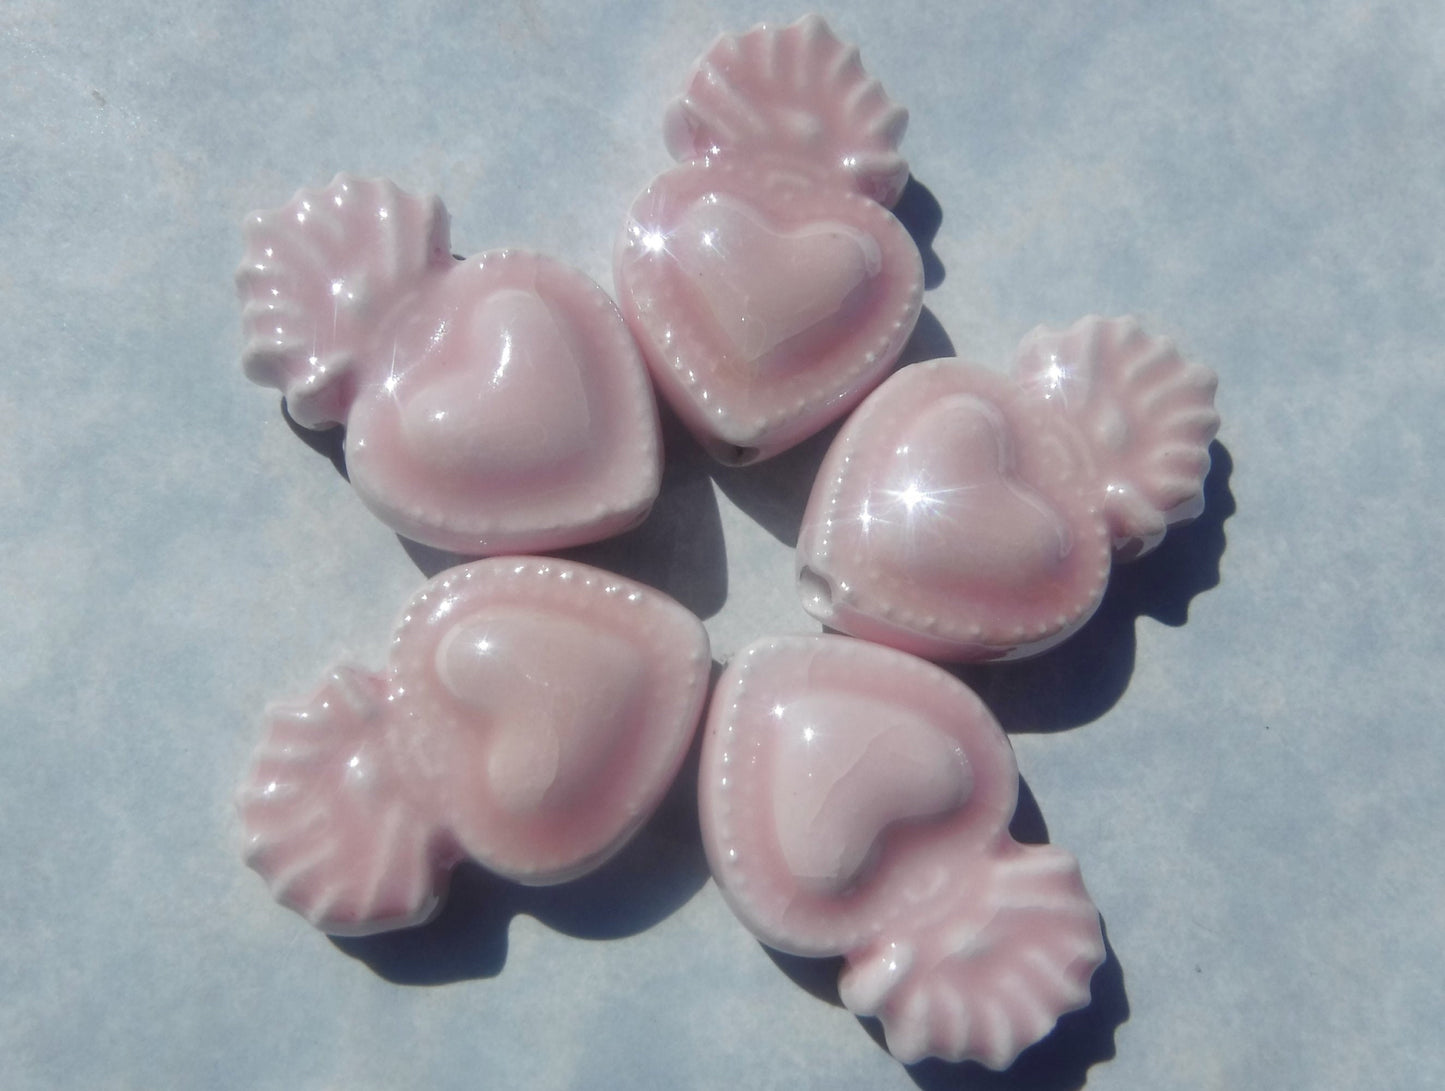 Pink Milagro Heart Beads - Ceramic Mosaic Tiles - Small Sacred Heart Beads - Jewelry Supplies